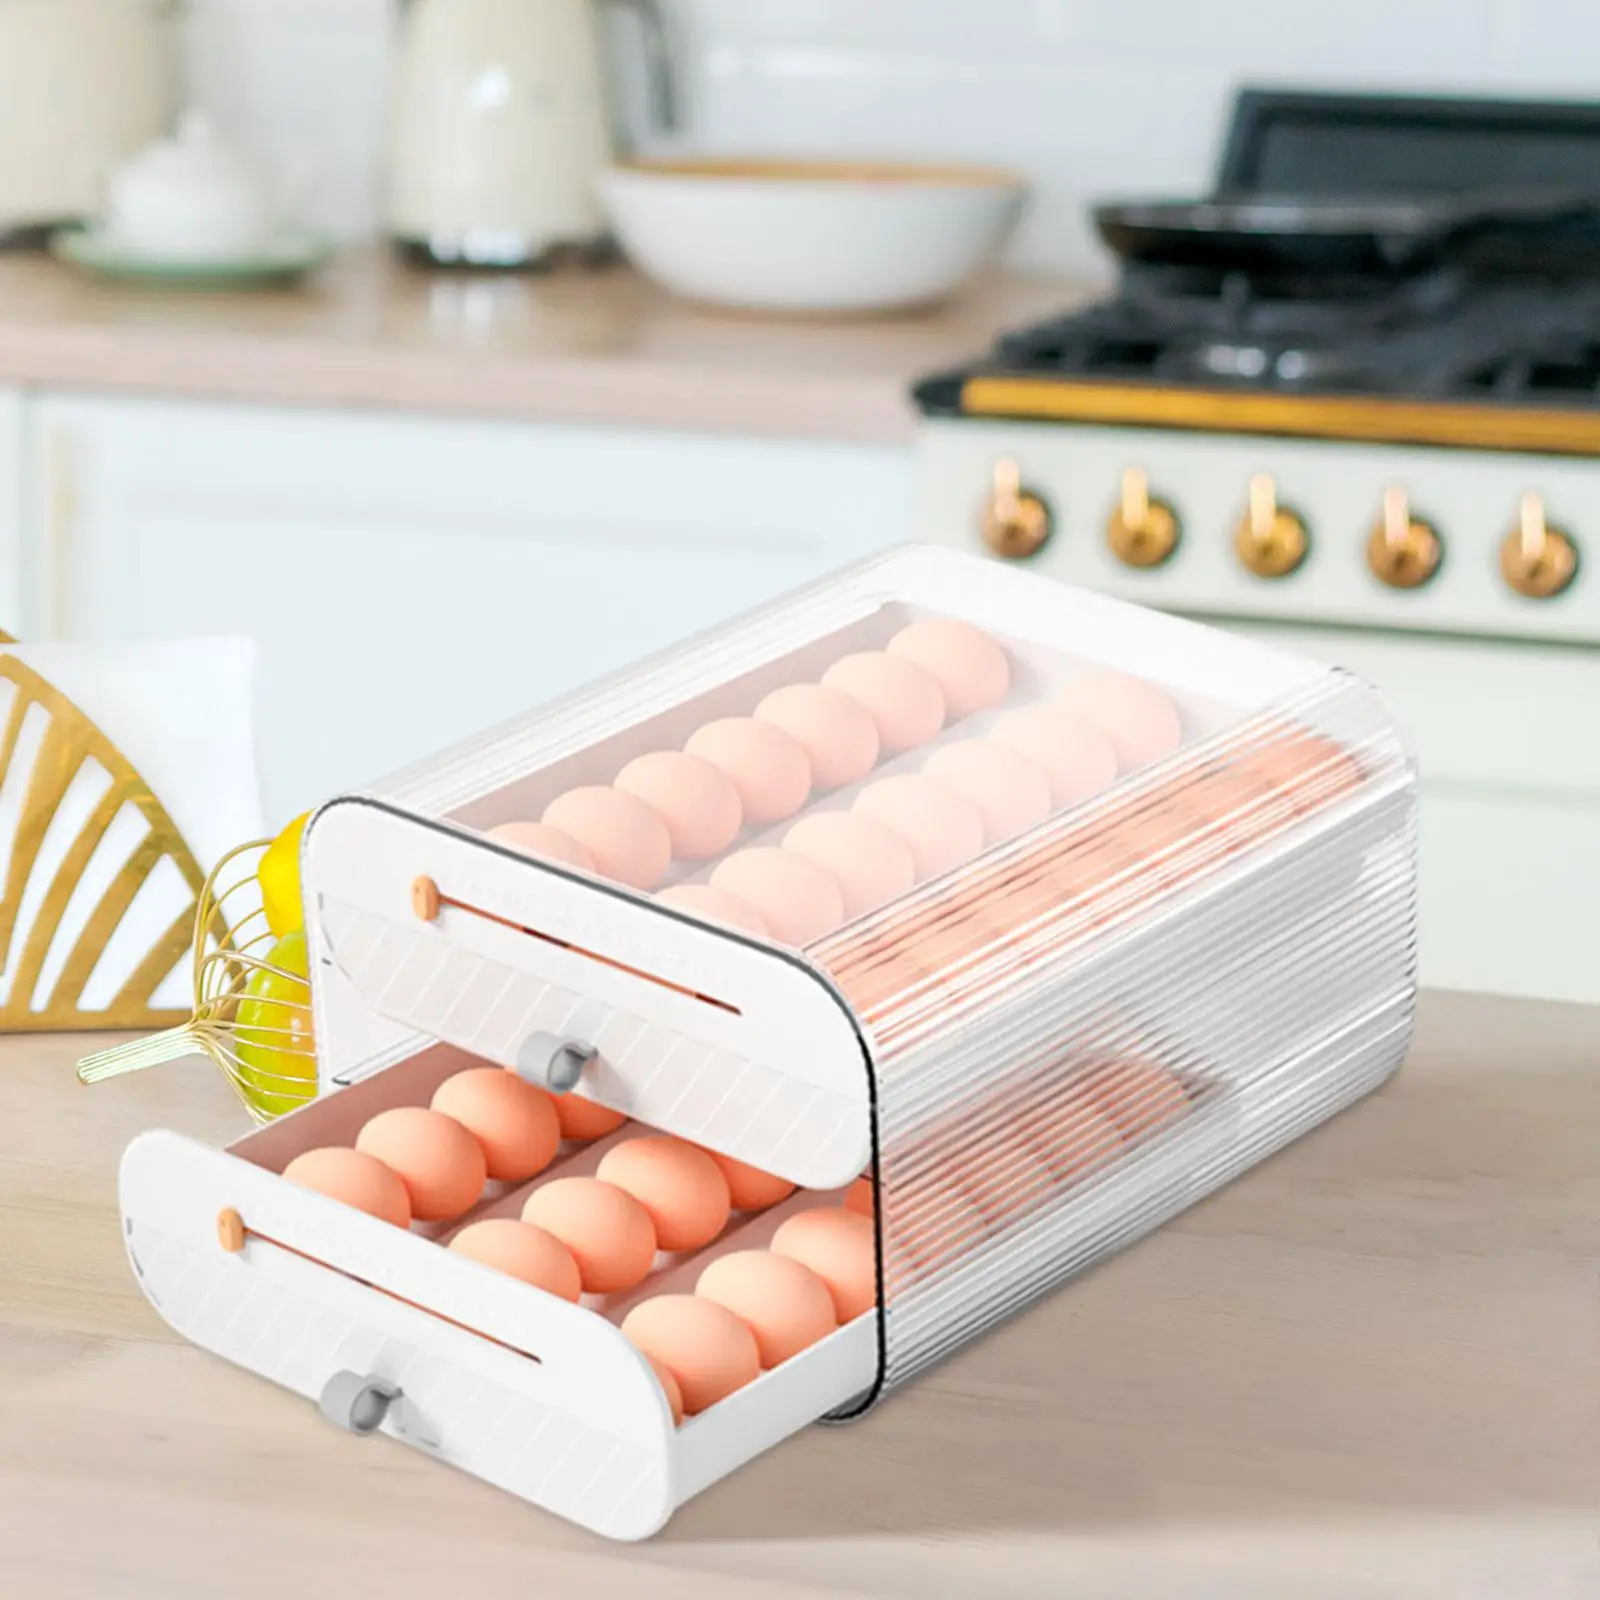 Egg Holder Stackable Clear Save Space Automatic Rolling 2 Tiers Drawer Trays with Time Marker for Pantry Fridge Countertop